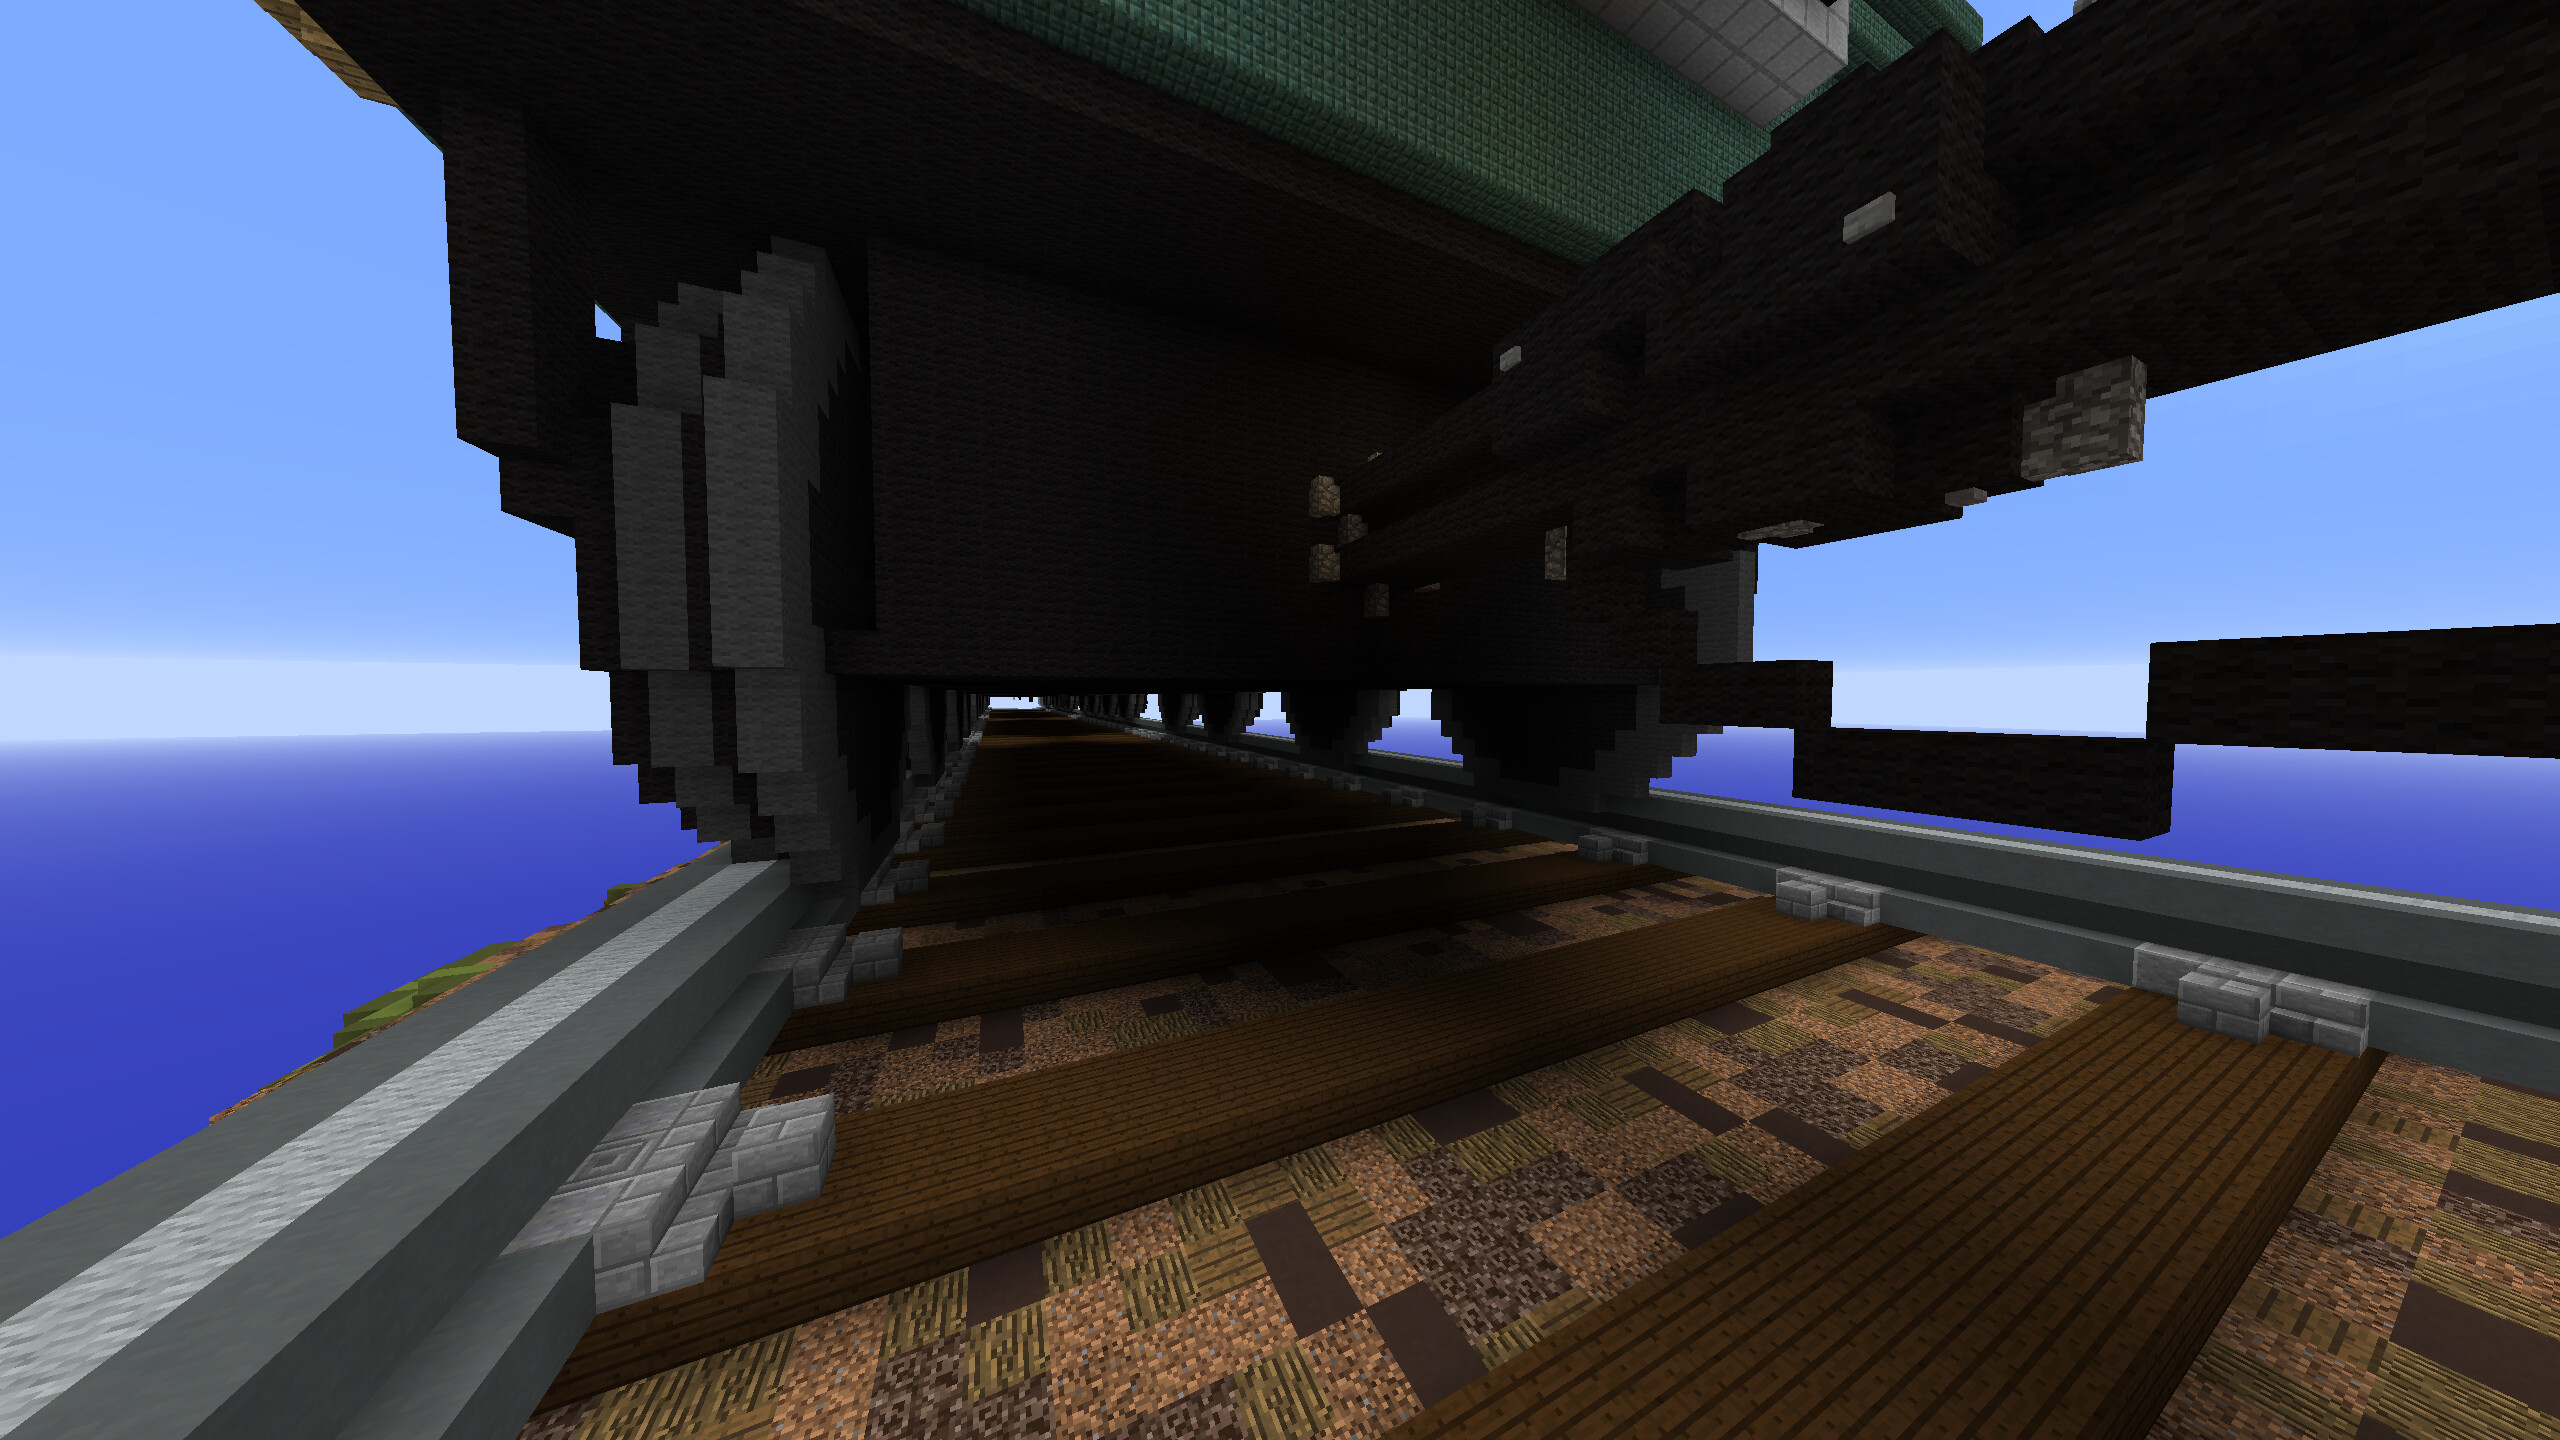 Exploring The Train From Mario Party 8 In Minecraft Is Pretty Fun